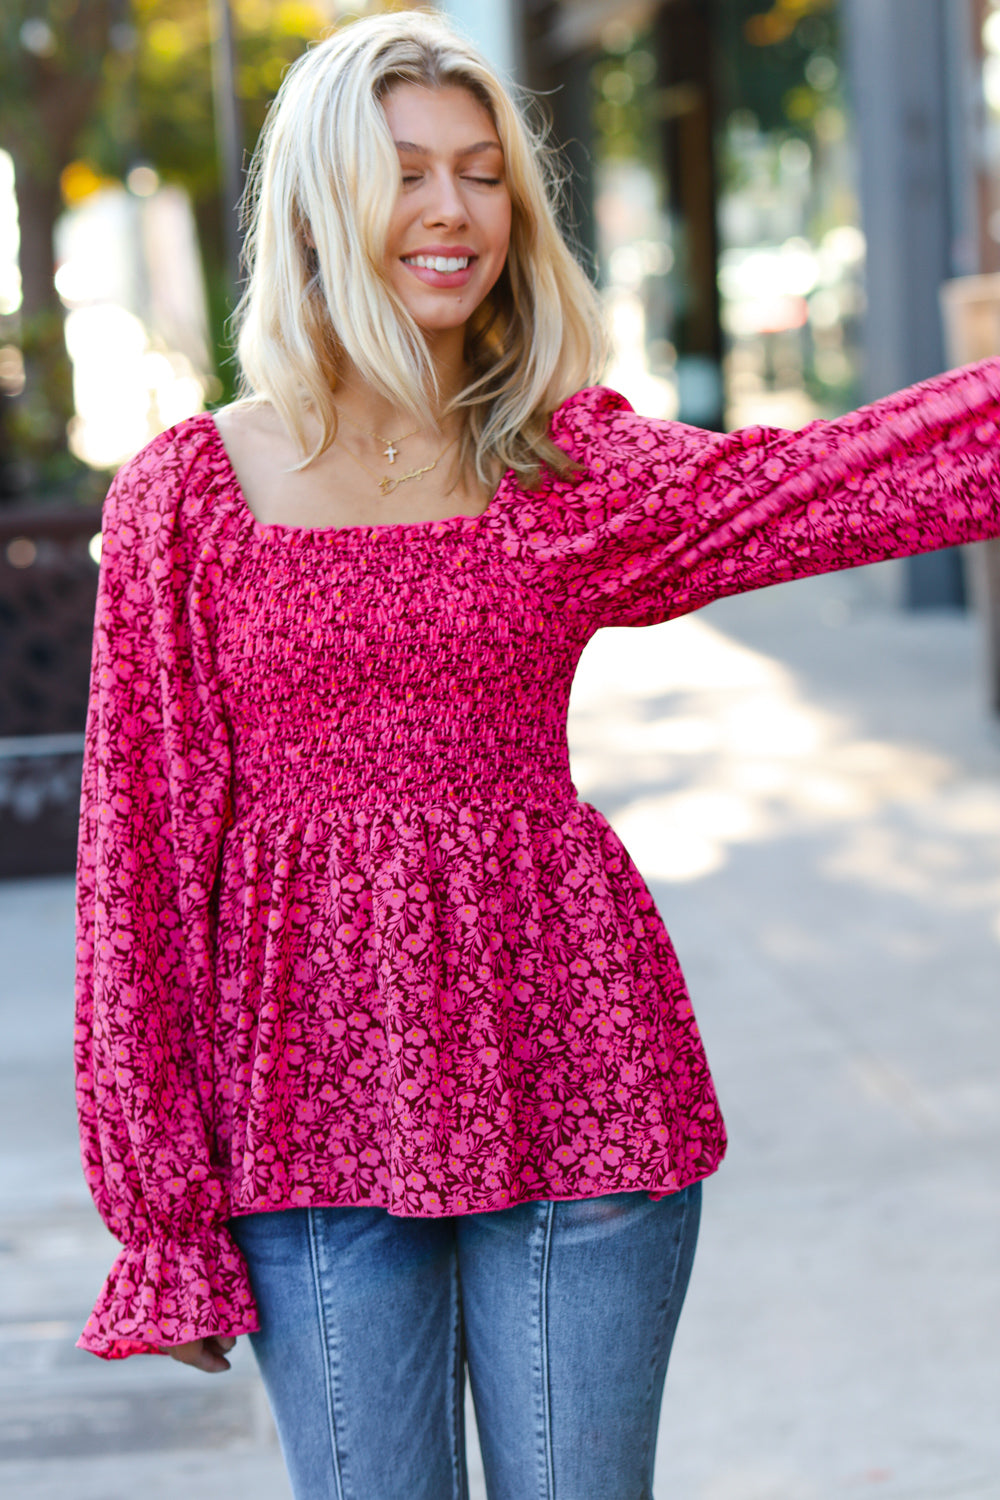 Always With You Fuchsia Smocked Ditzy Floral Ruffle Top